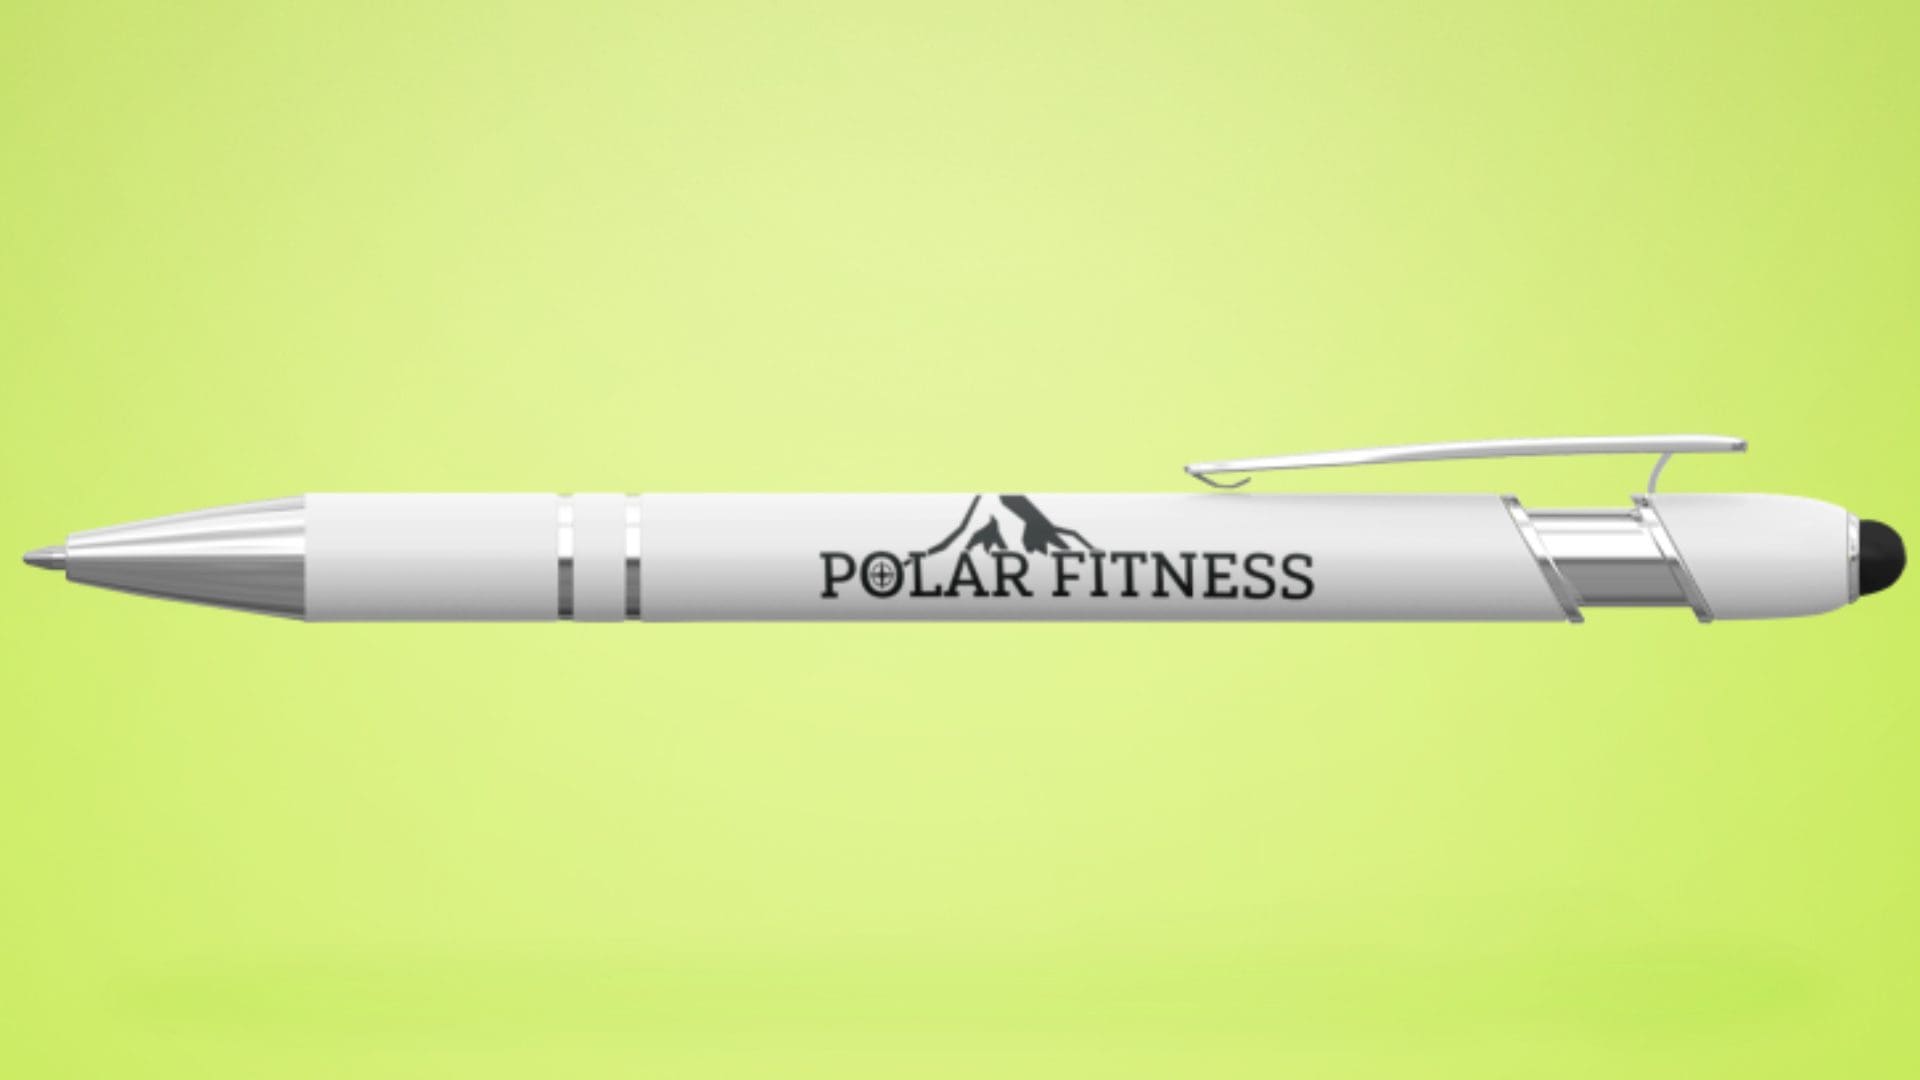 Polar Physical Therapy and Fitness – Belfast Pens